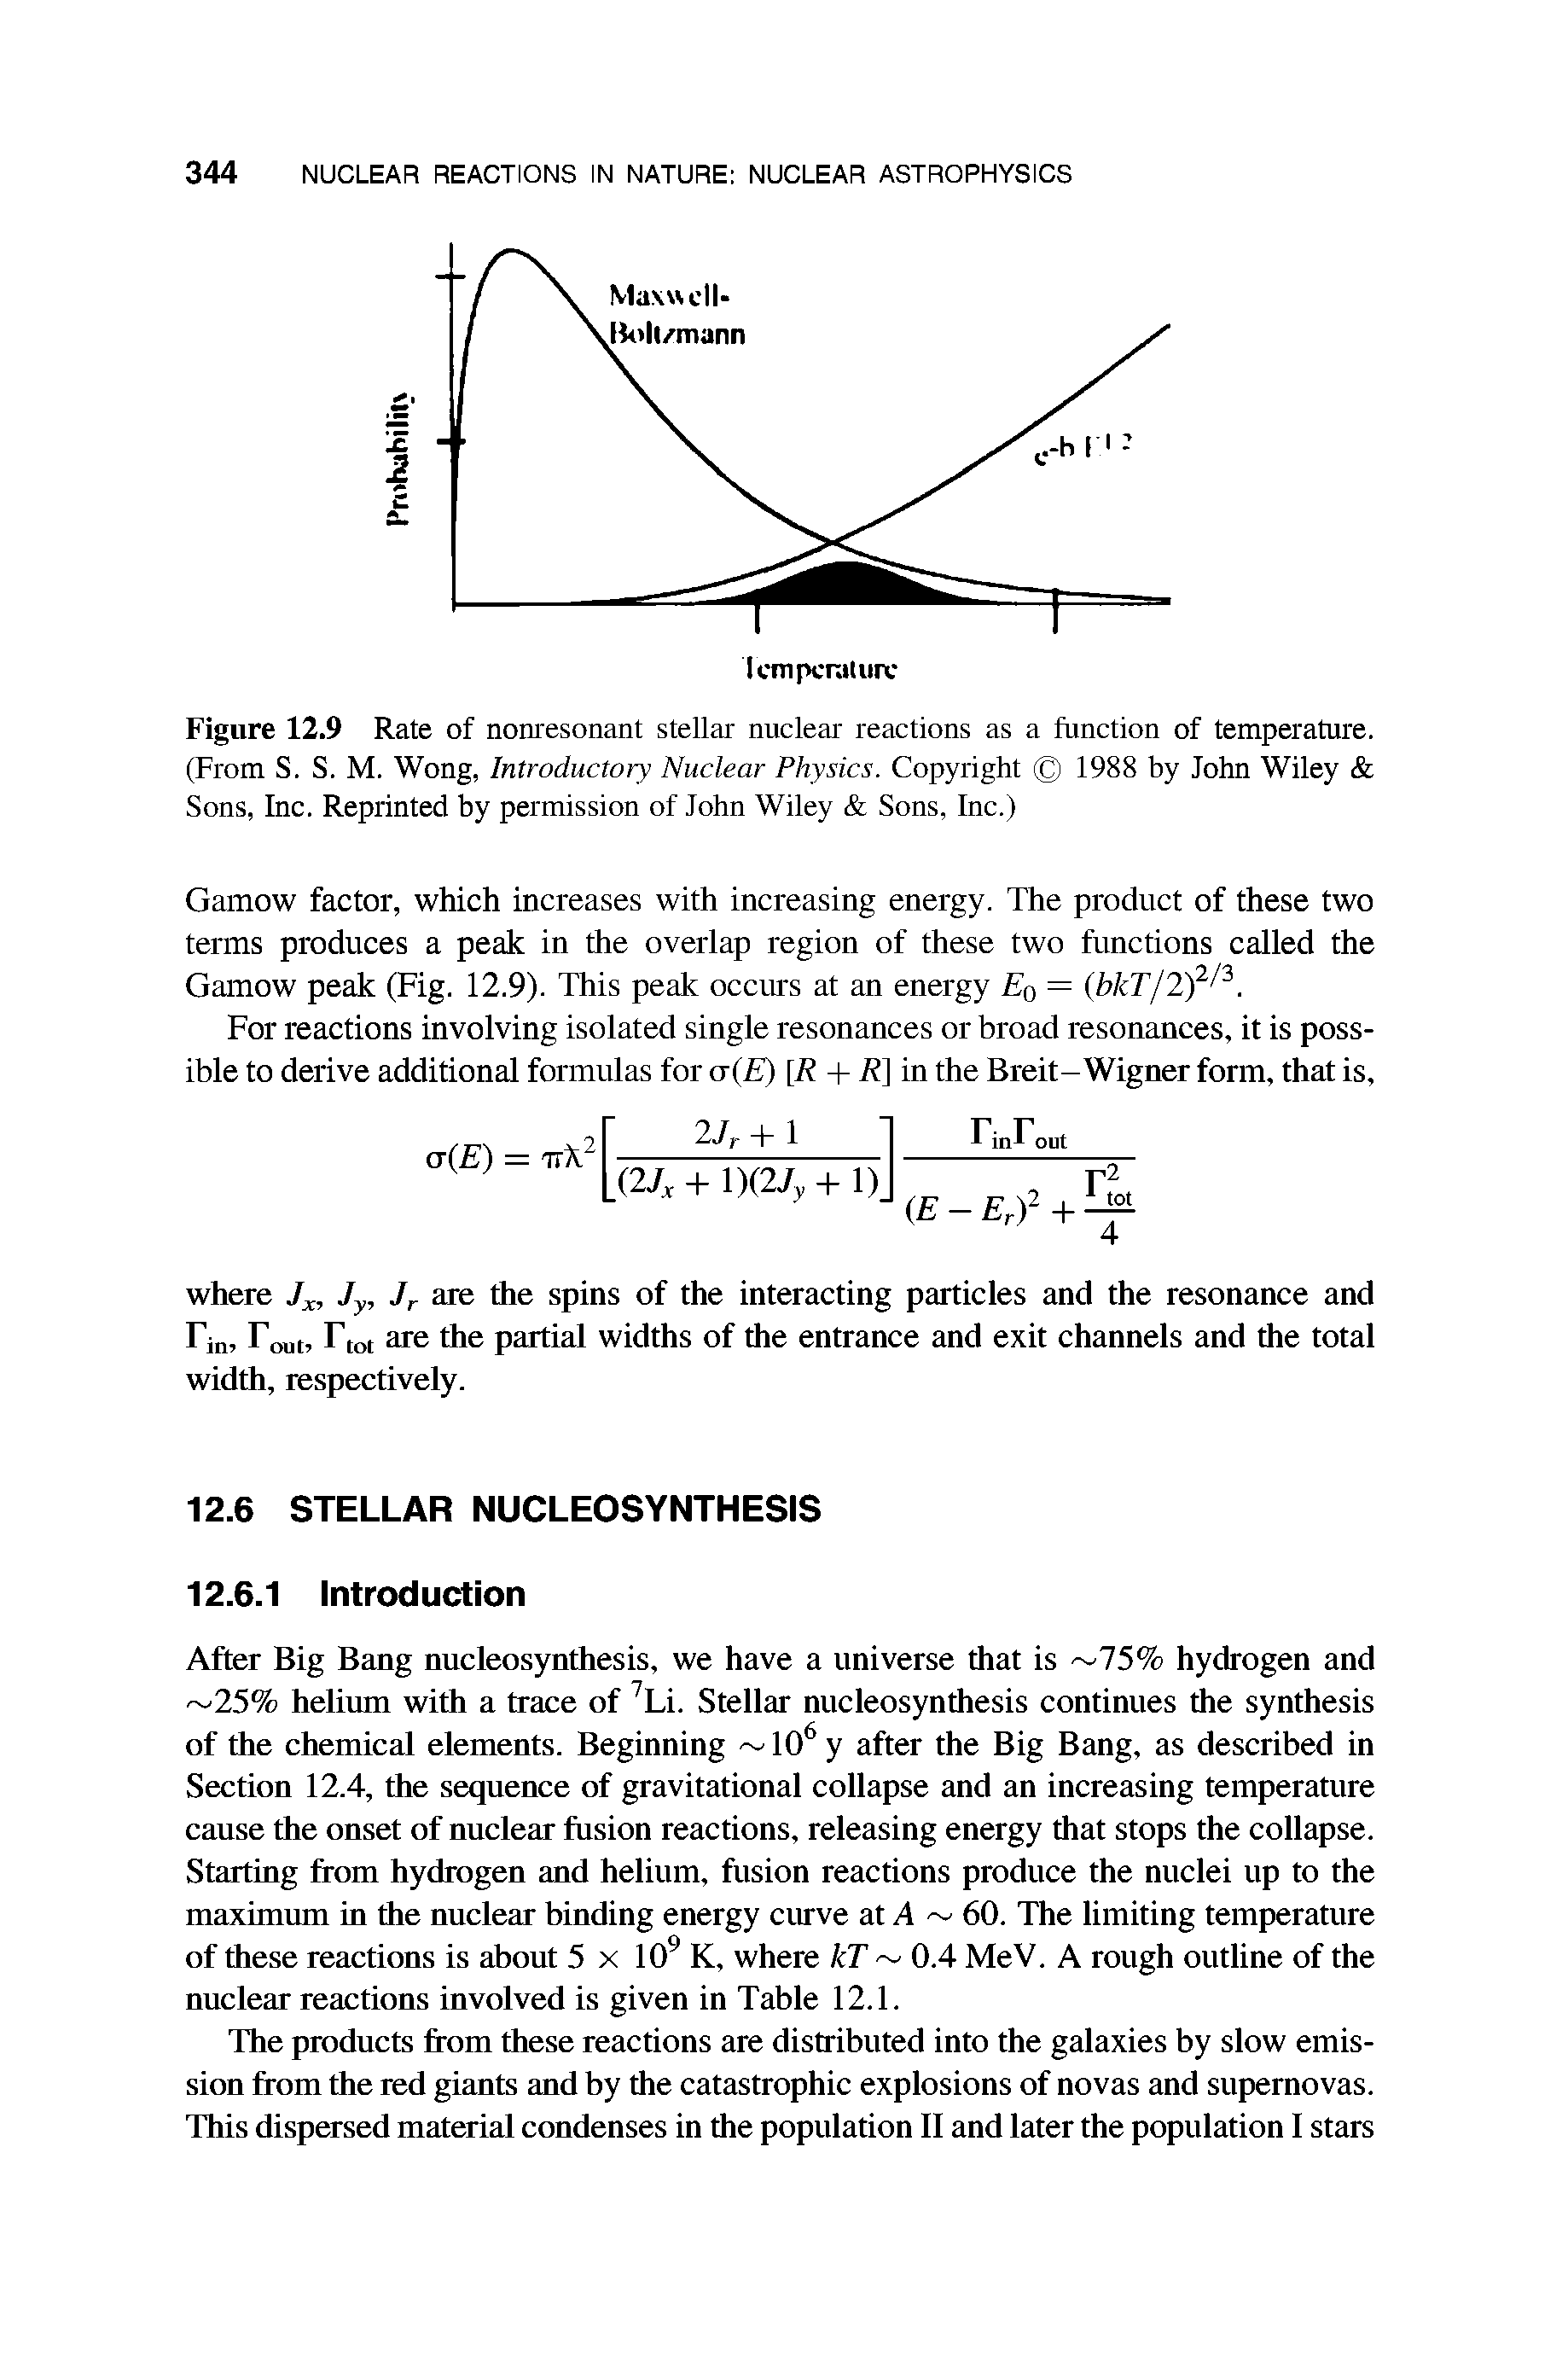 Figure 12.9 Rate of nonresonant stellar nuclear reactions as a function of temperature. (From S. S. M. Wong, Introductory Nuclear Physics. Copyright 1988 by John Wiley Sons, Inc. Reprinted by permission of John Wiley Sons, Inc.)...